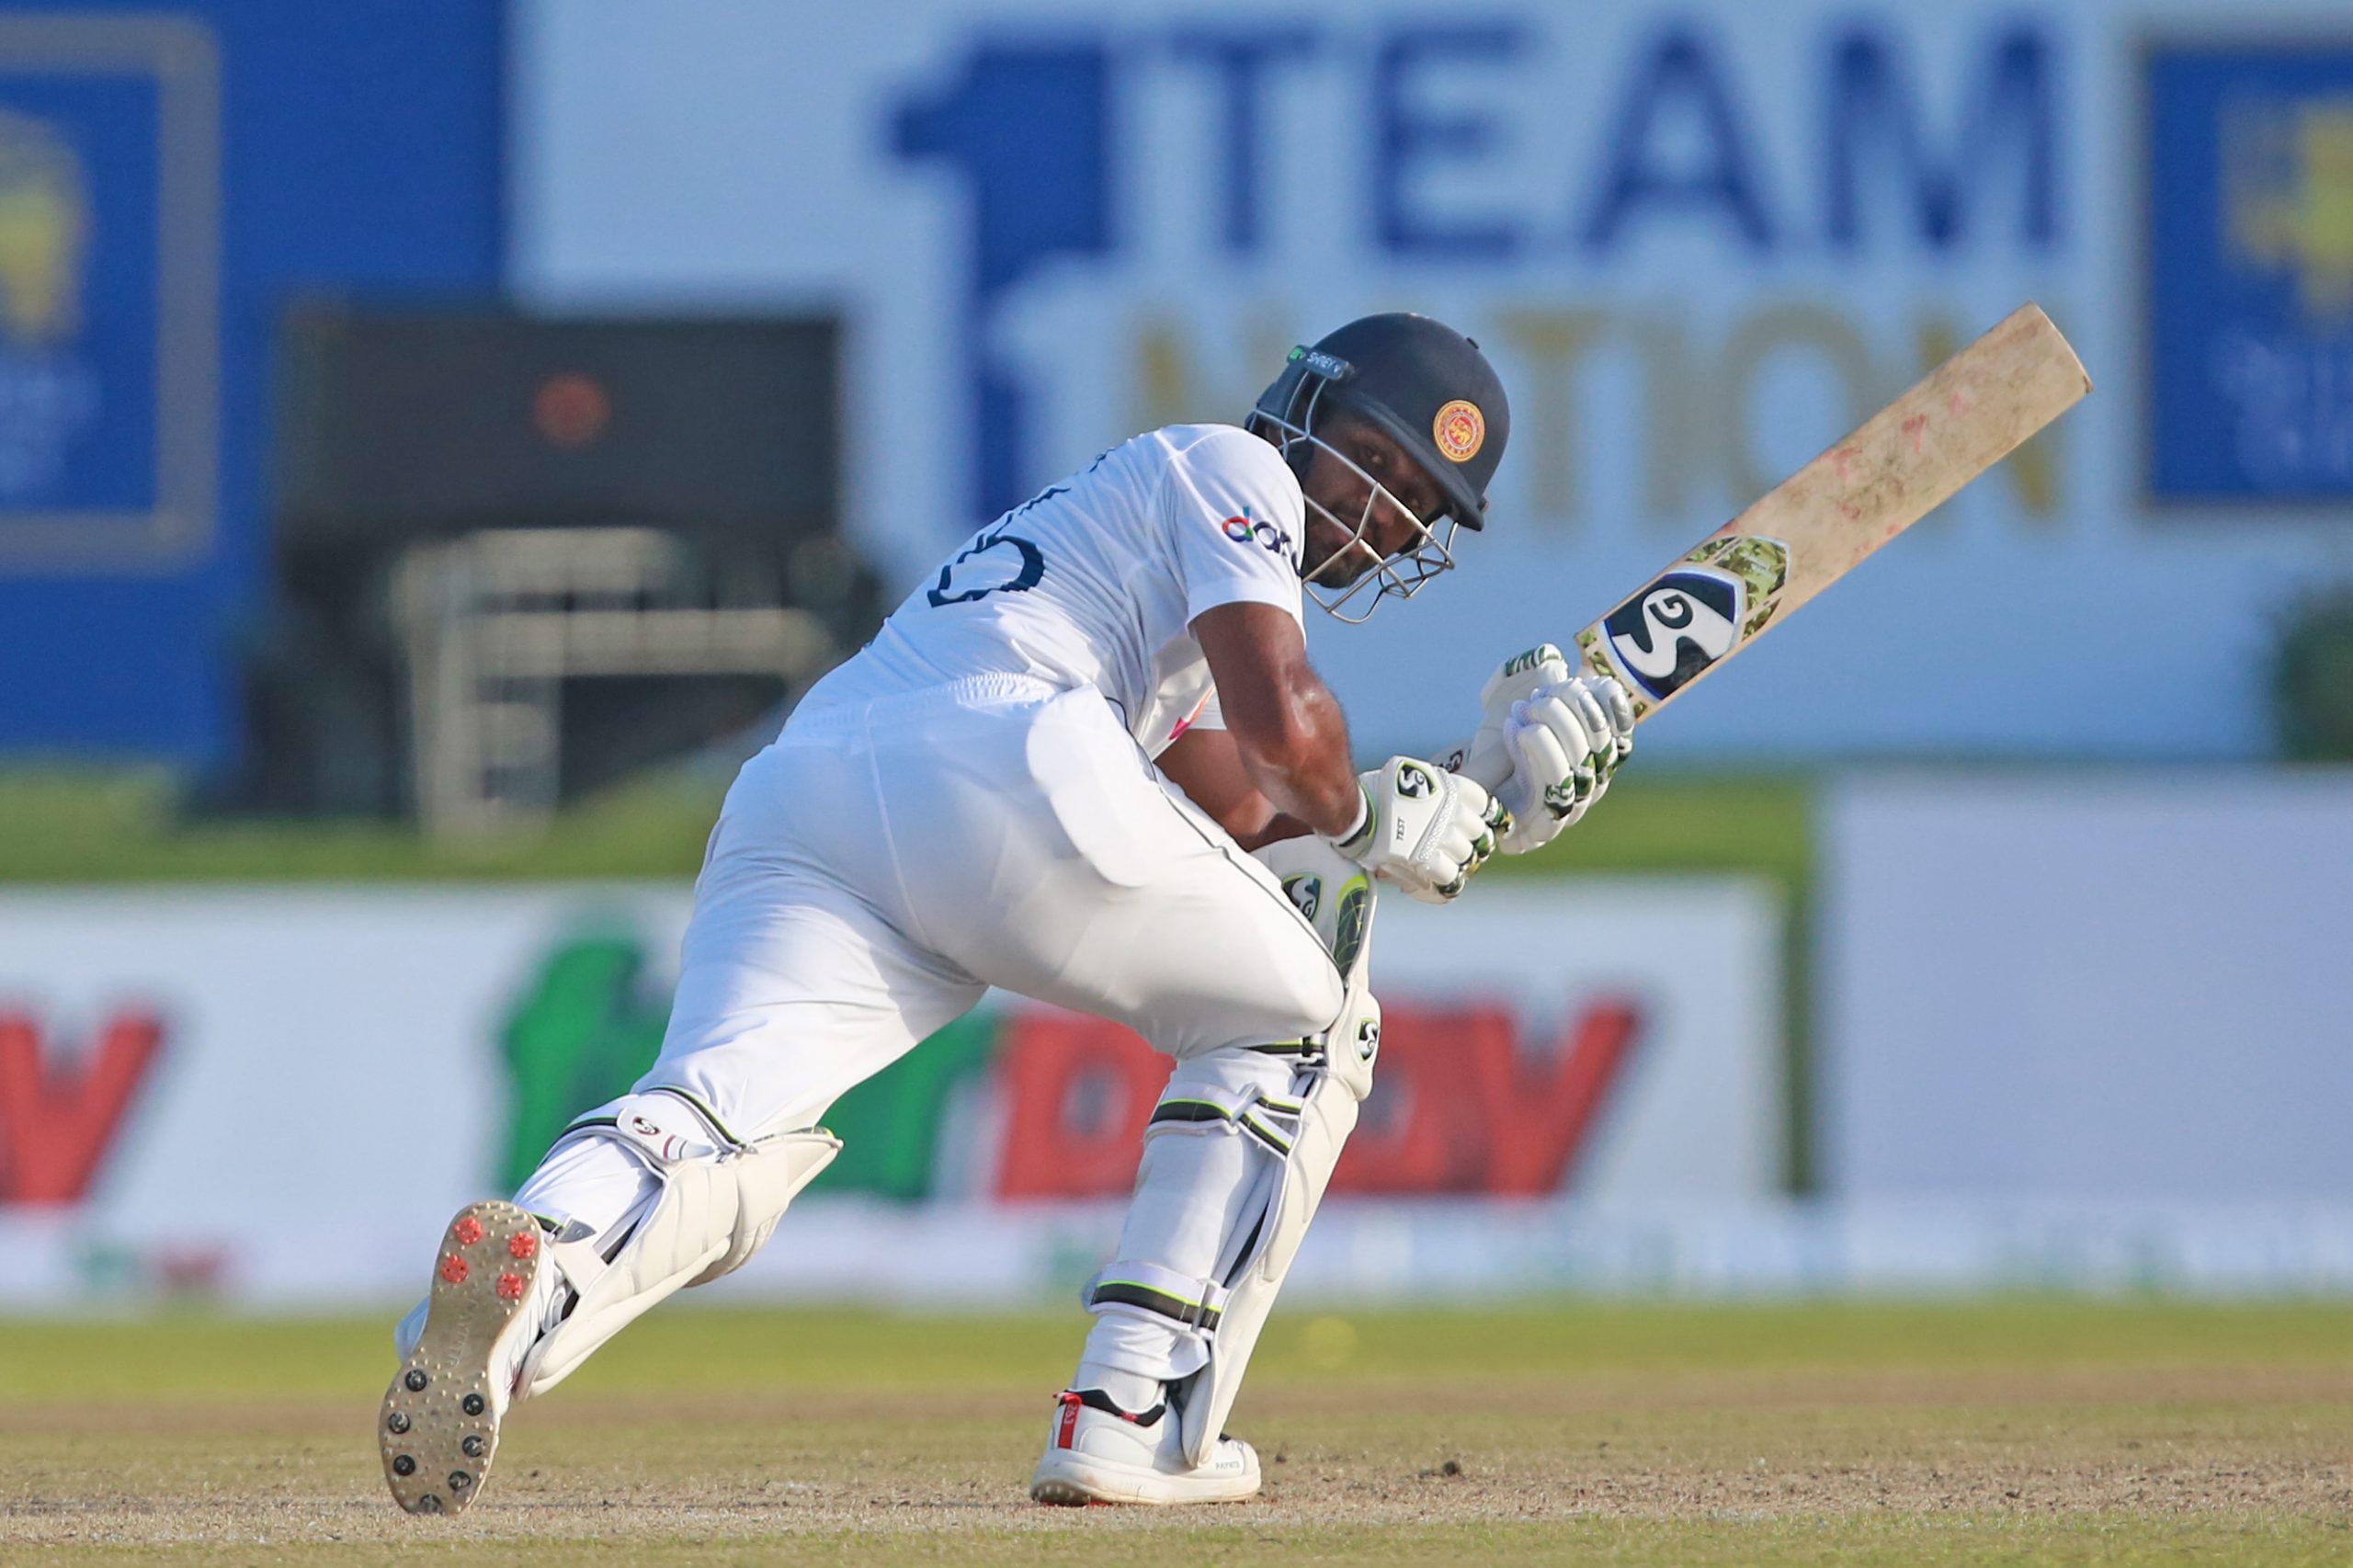 Dimuth Karunaratne in magical century streak – 132 n.o. in Sri Lanka’s 267/3 vs West Indies on opening day of first test